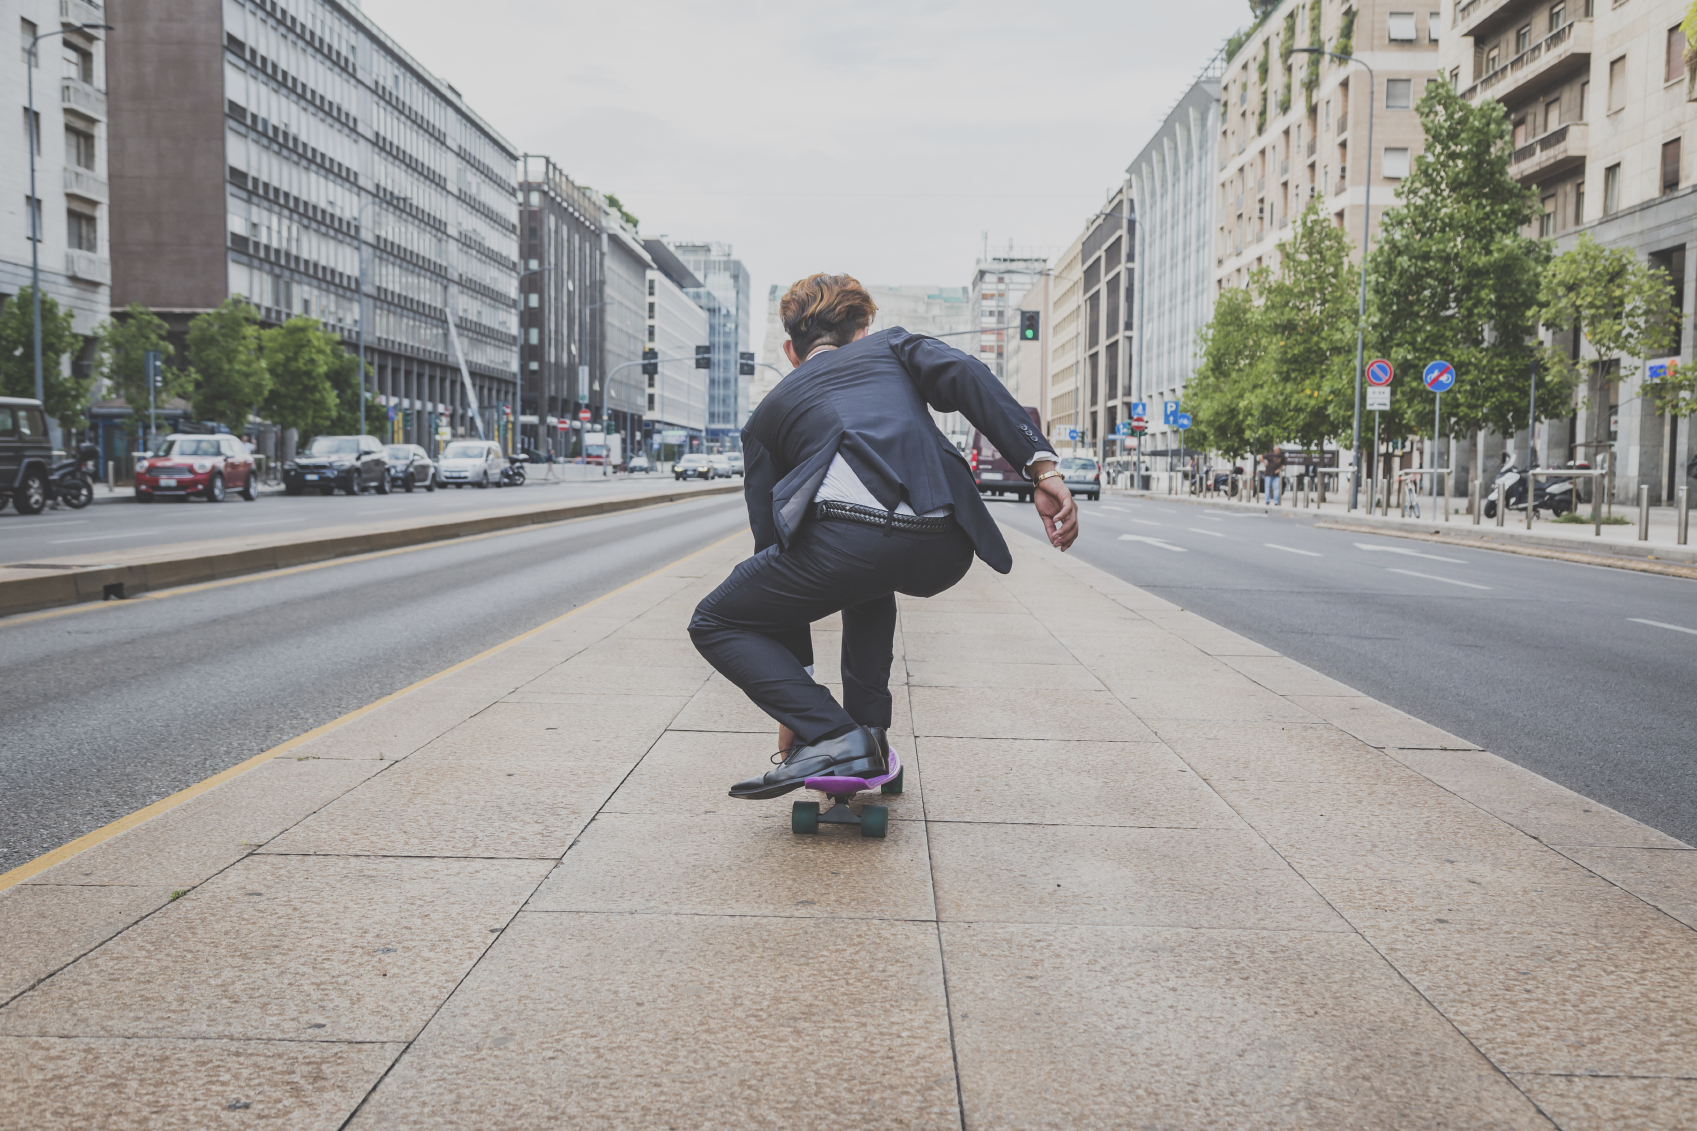 Young handsome Asian model dressed in dark suit and tie riding his skateboard